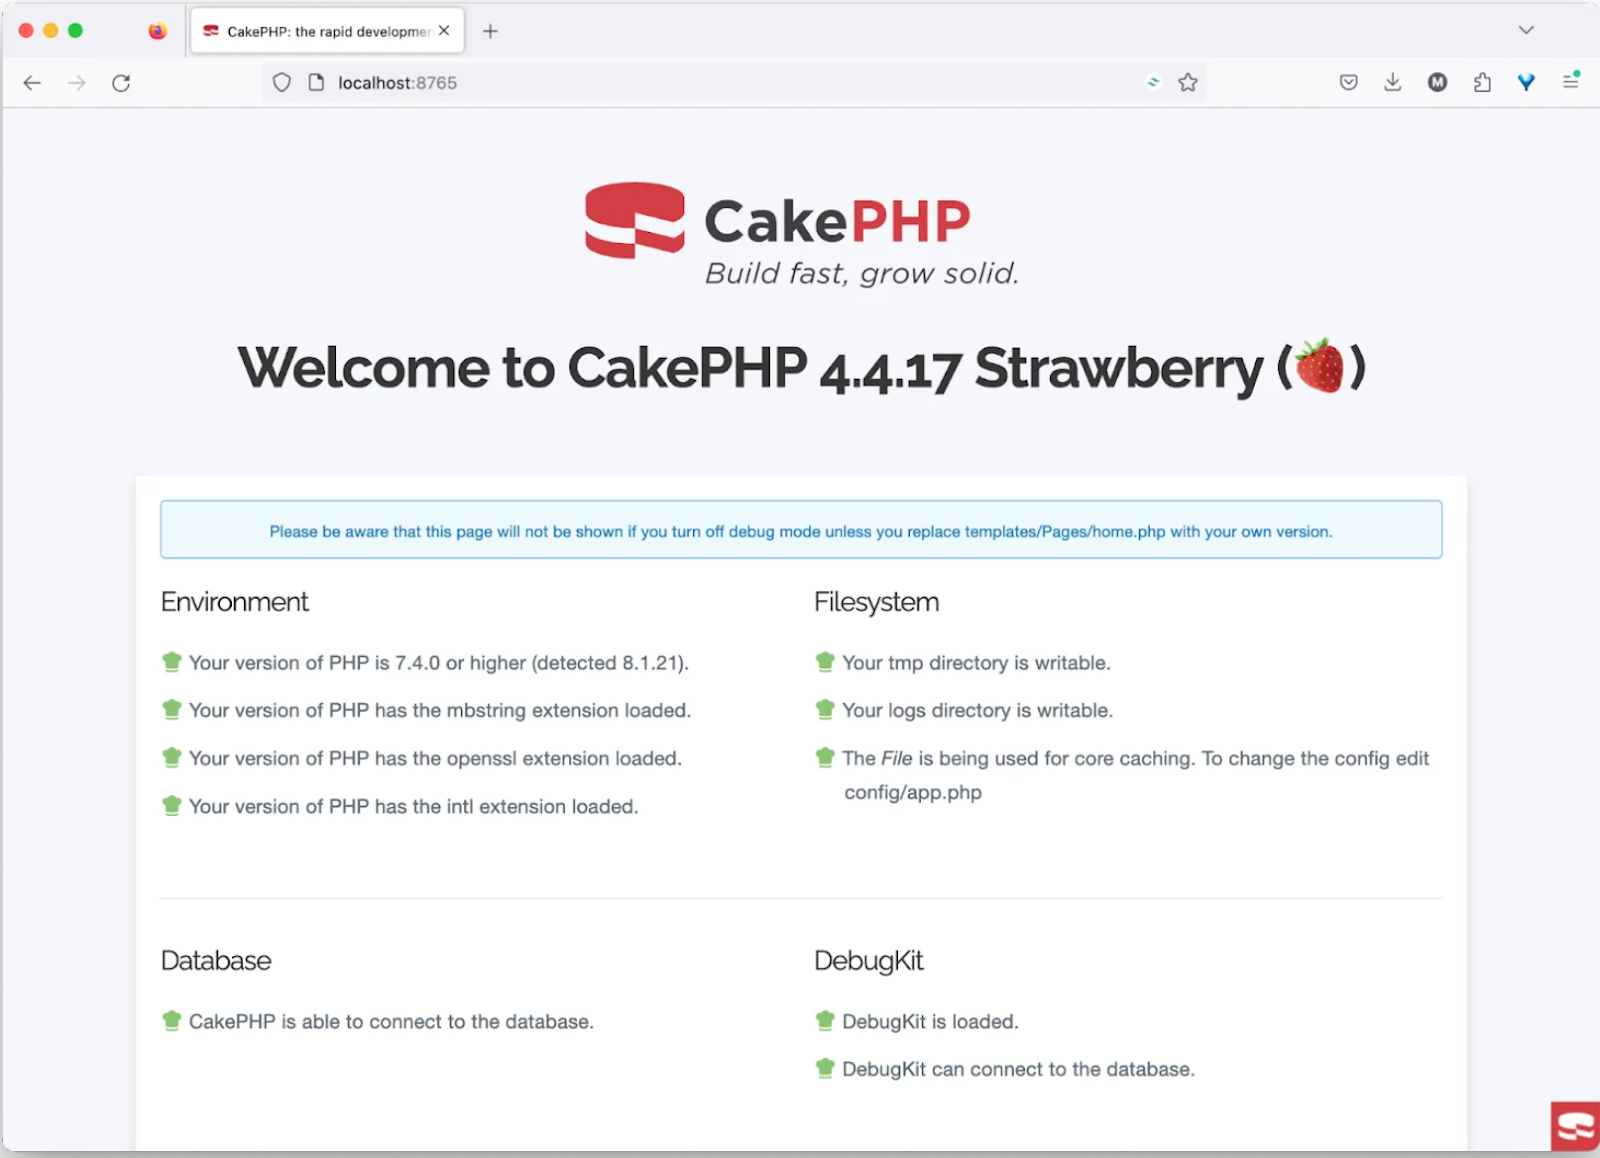 The default home page of a CakePHP application running in Firefox on macOS. It shows the top part of the page, where all of the required prerequisites for running CakePHP are met by the installation.